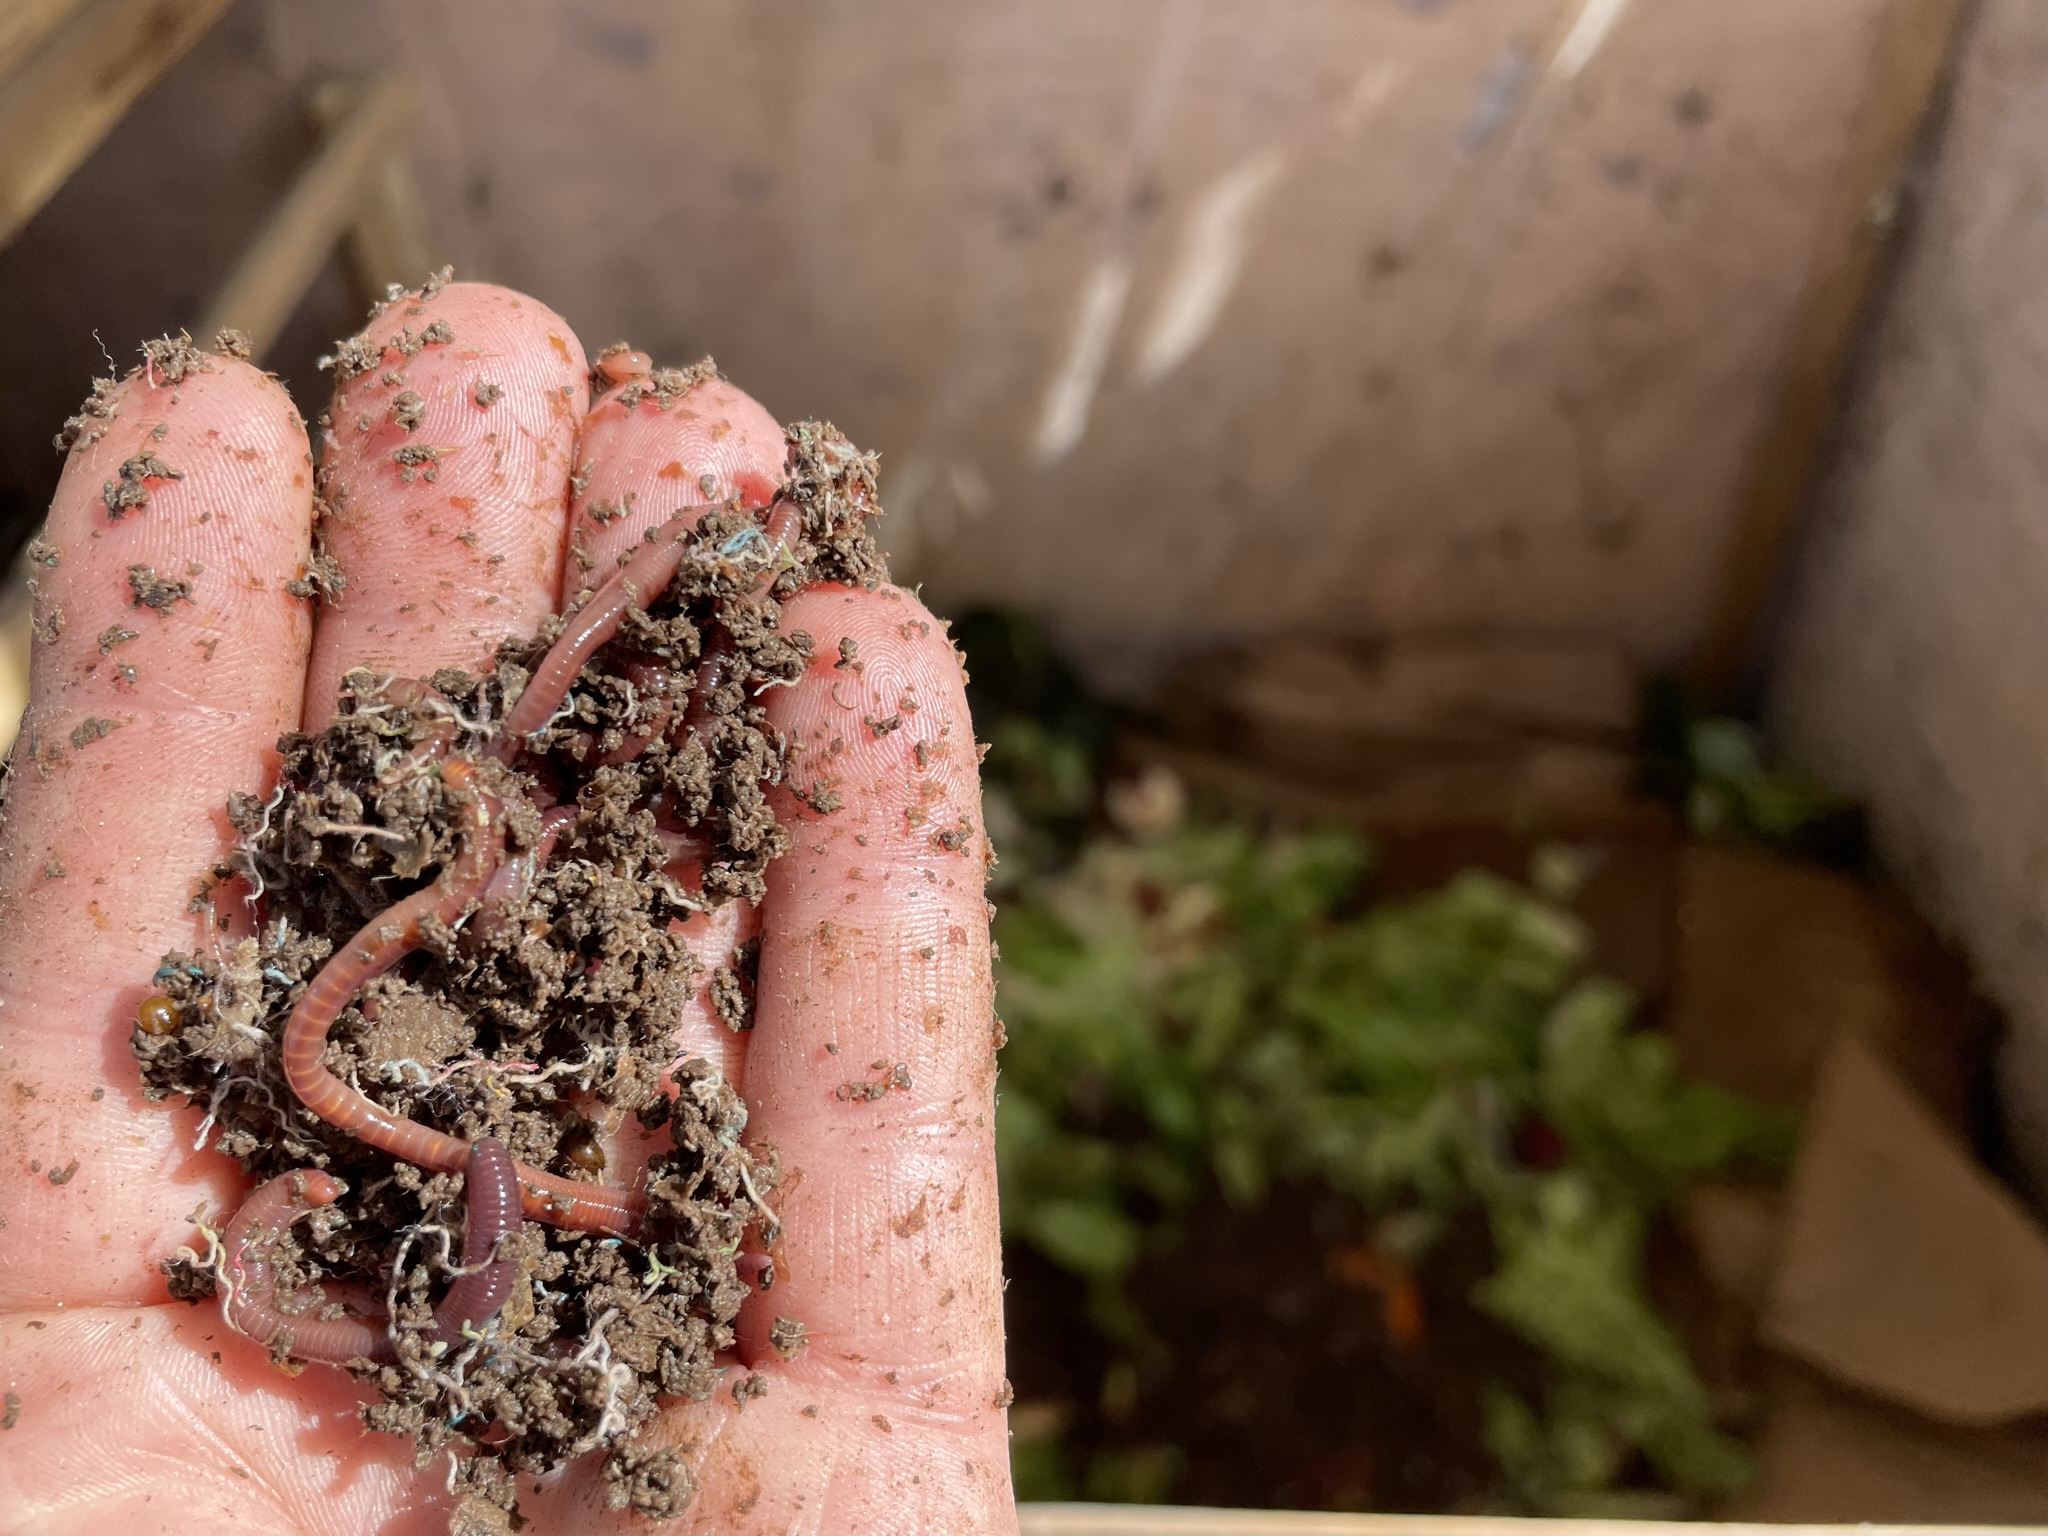 worms in dirt in a hand